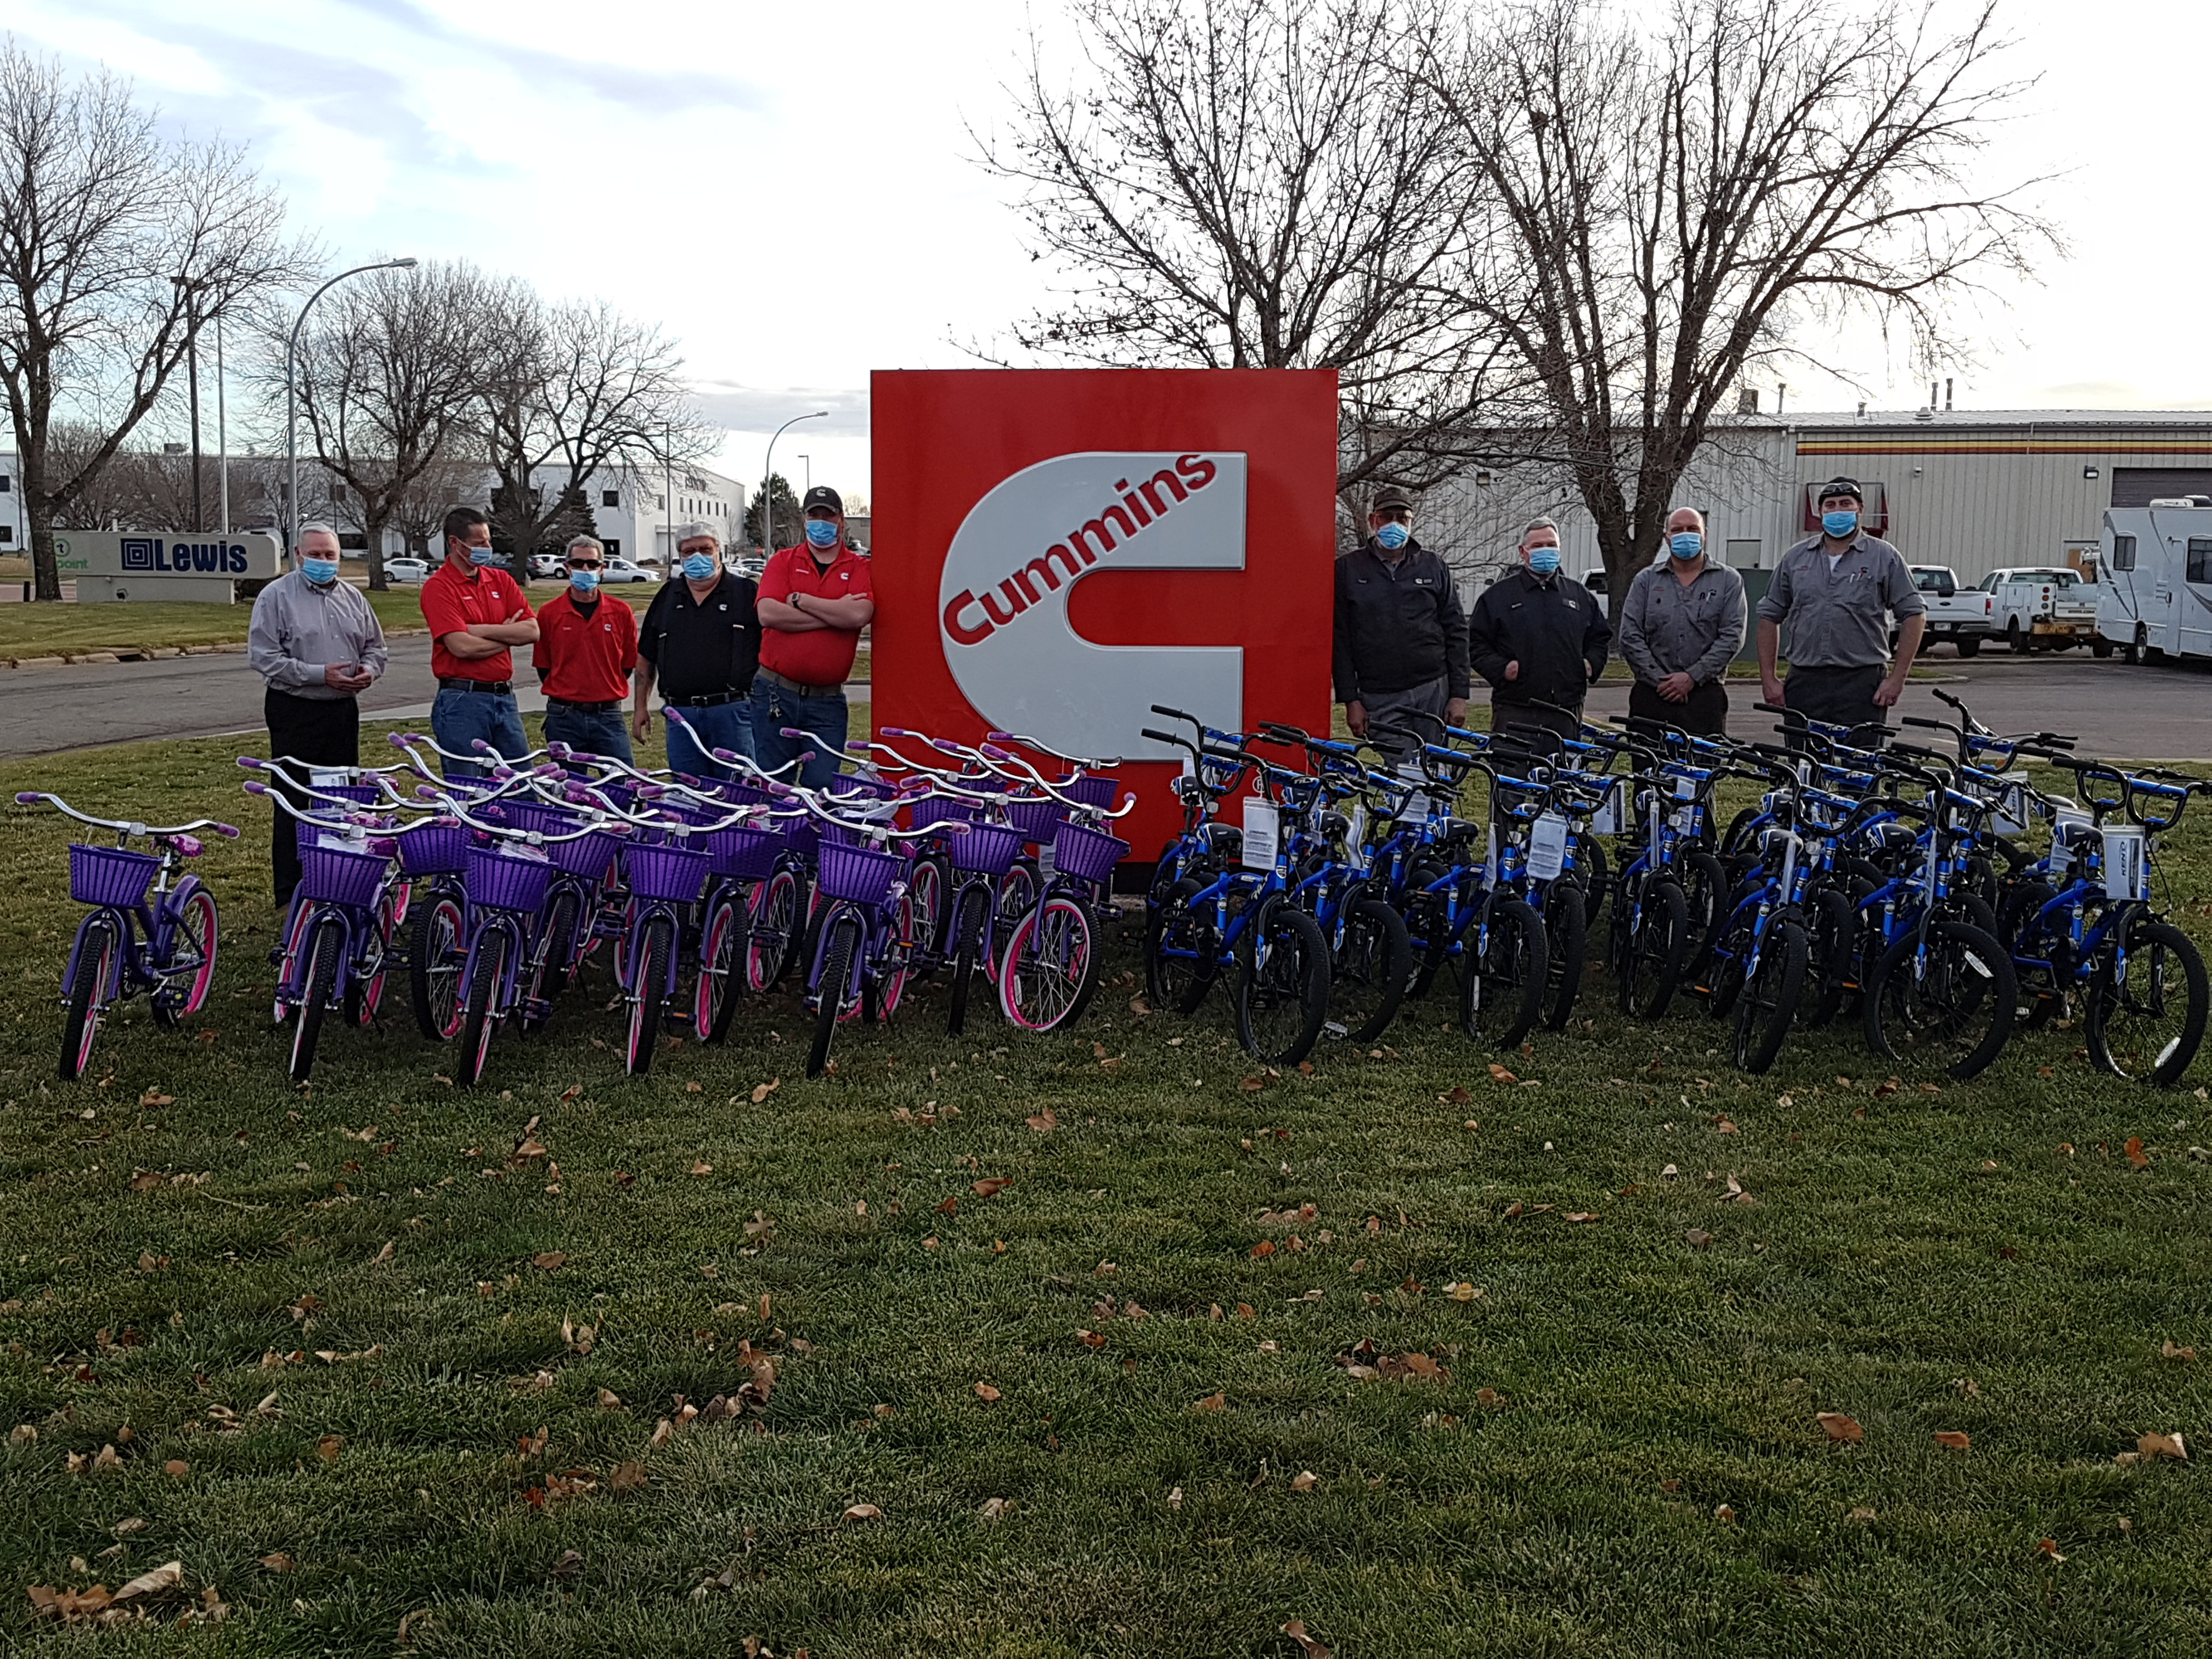 Cummins employees standing alongside 50 bikes they assembled for Sioux Empire United Way funded agencies.